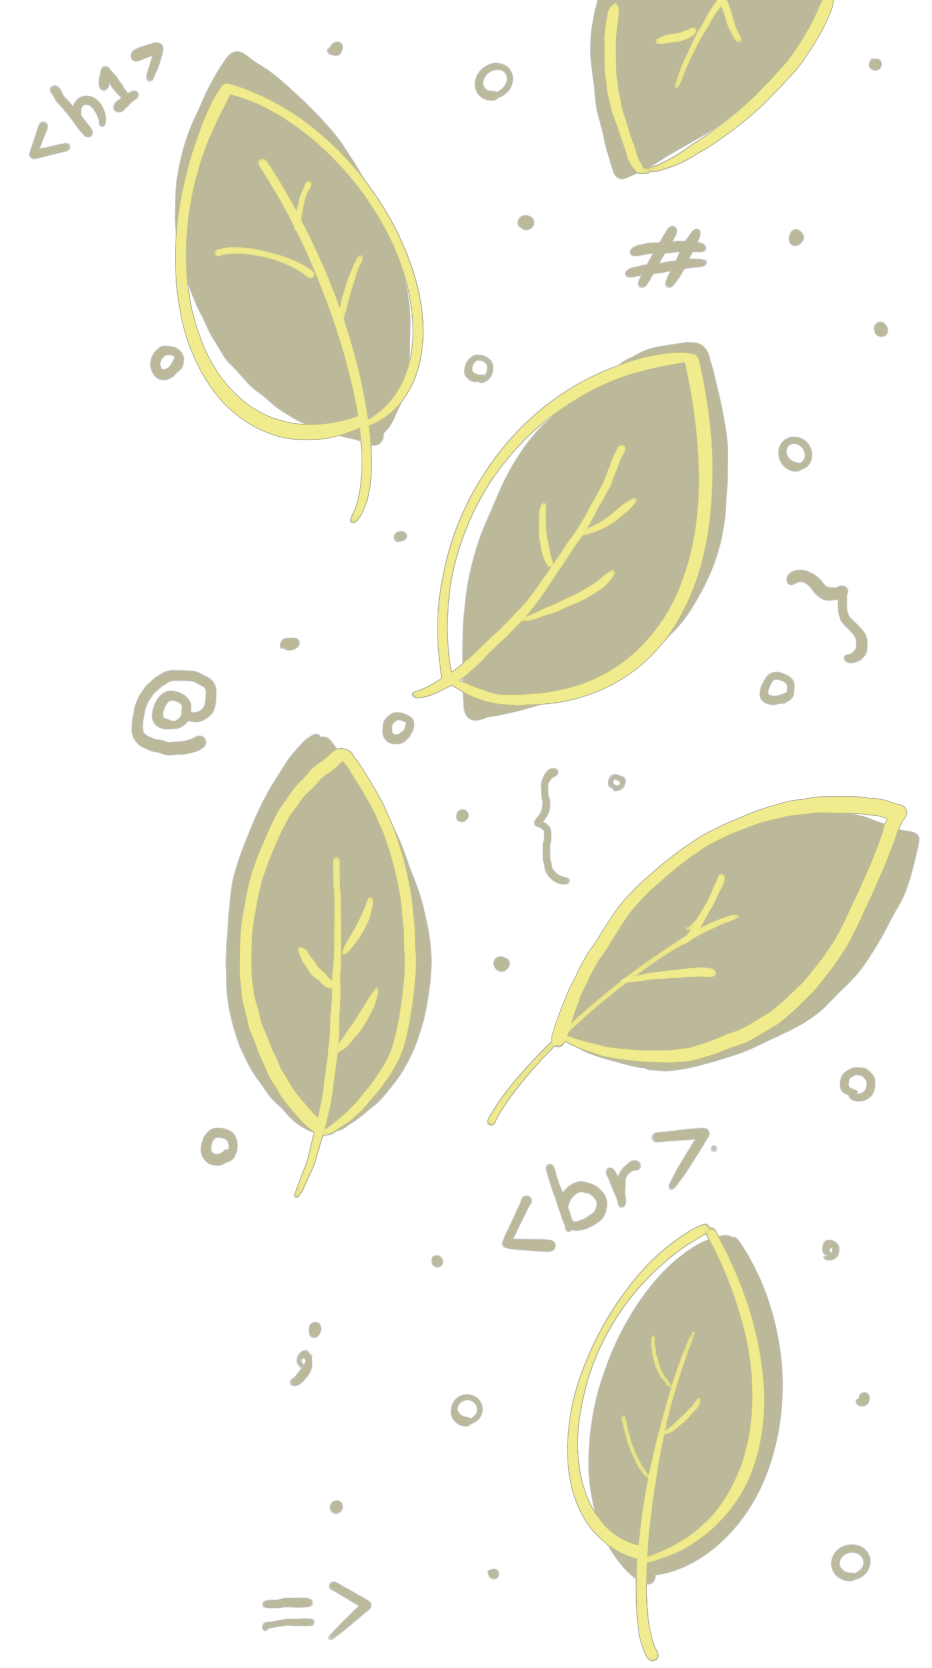 Duplicate illustration of leaves and front-end syntax